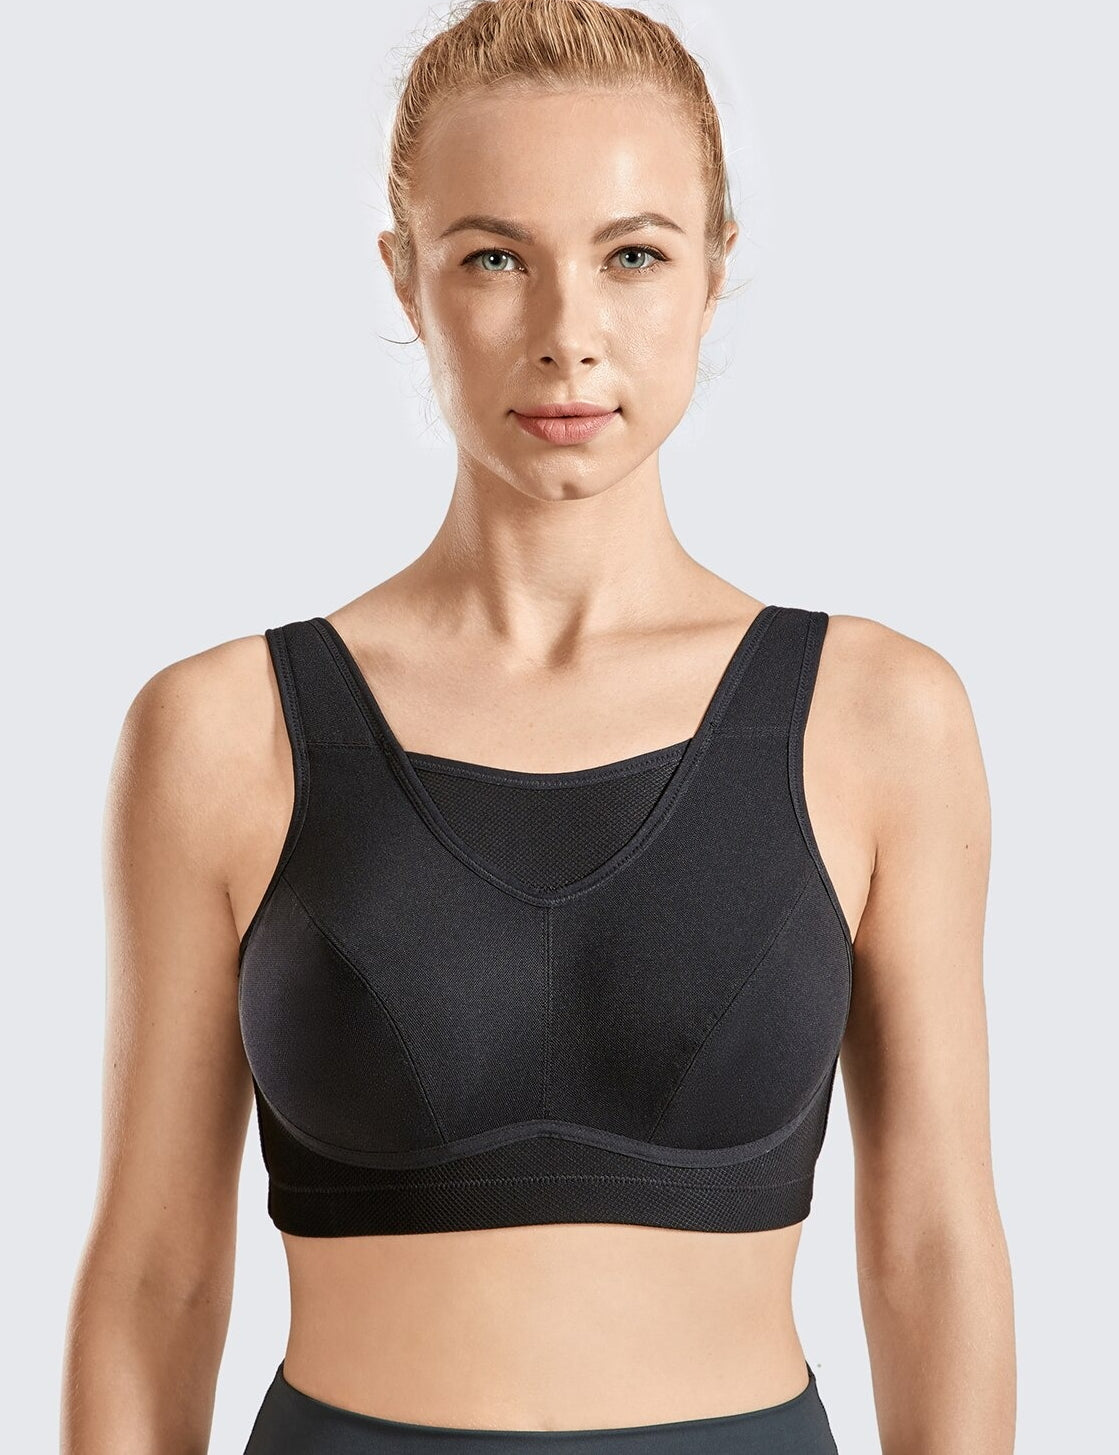 SYROKAN Womens High Impact Full Coverage Catalyst Sports Bra With Built In  Cups Expertly Designed, High Quality, And Latest Style At Factory Price  From Jiangzeming, $31.38